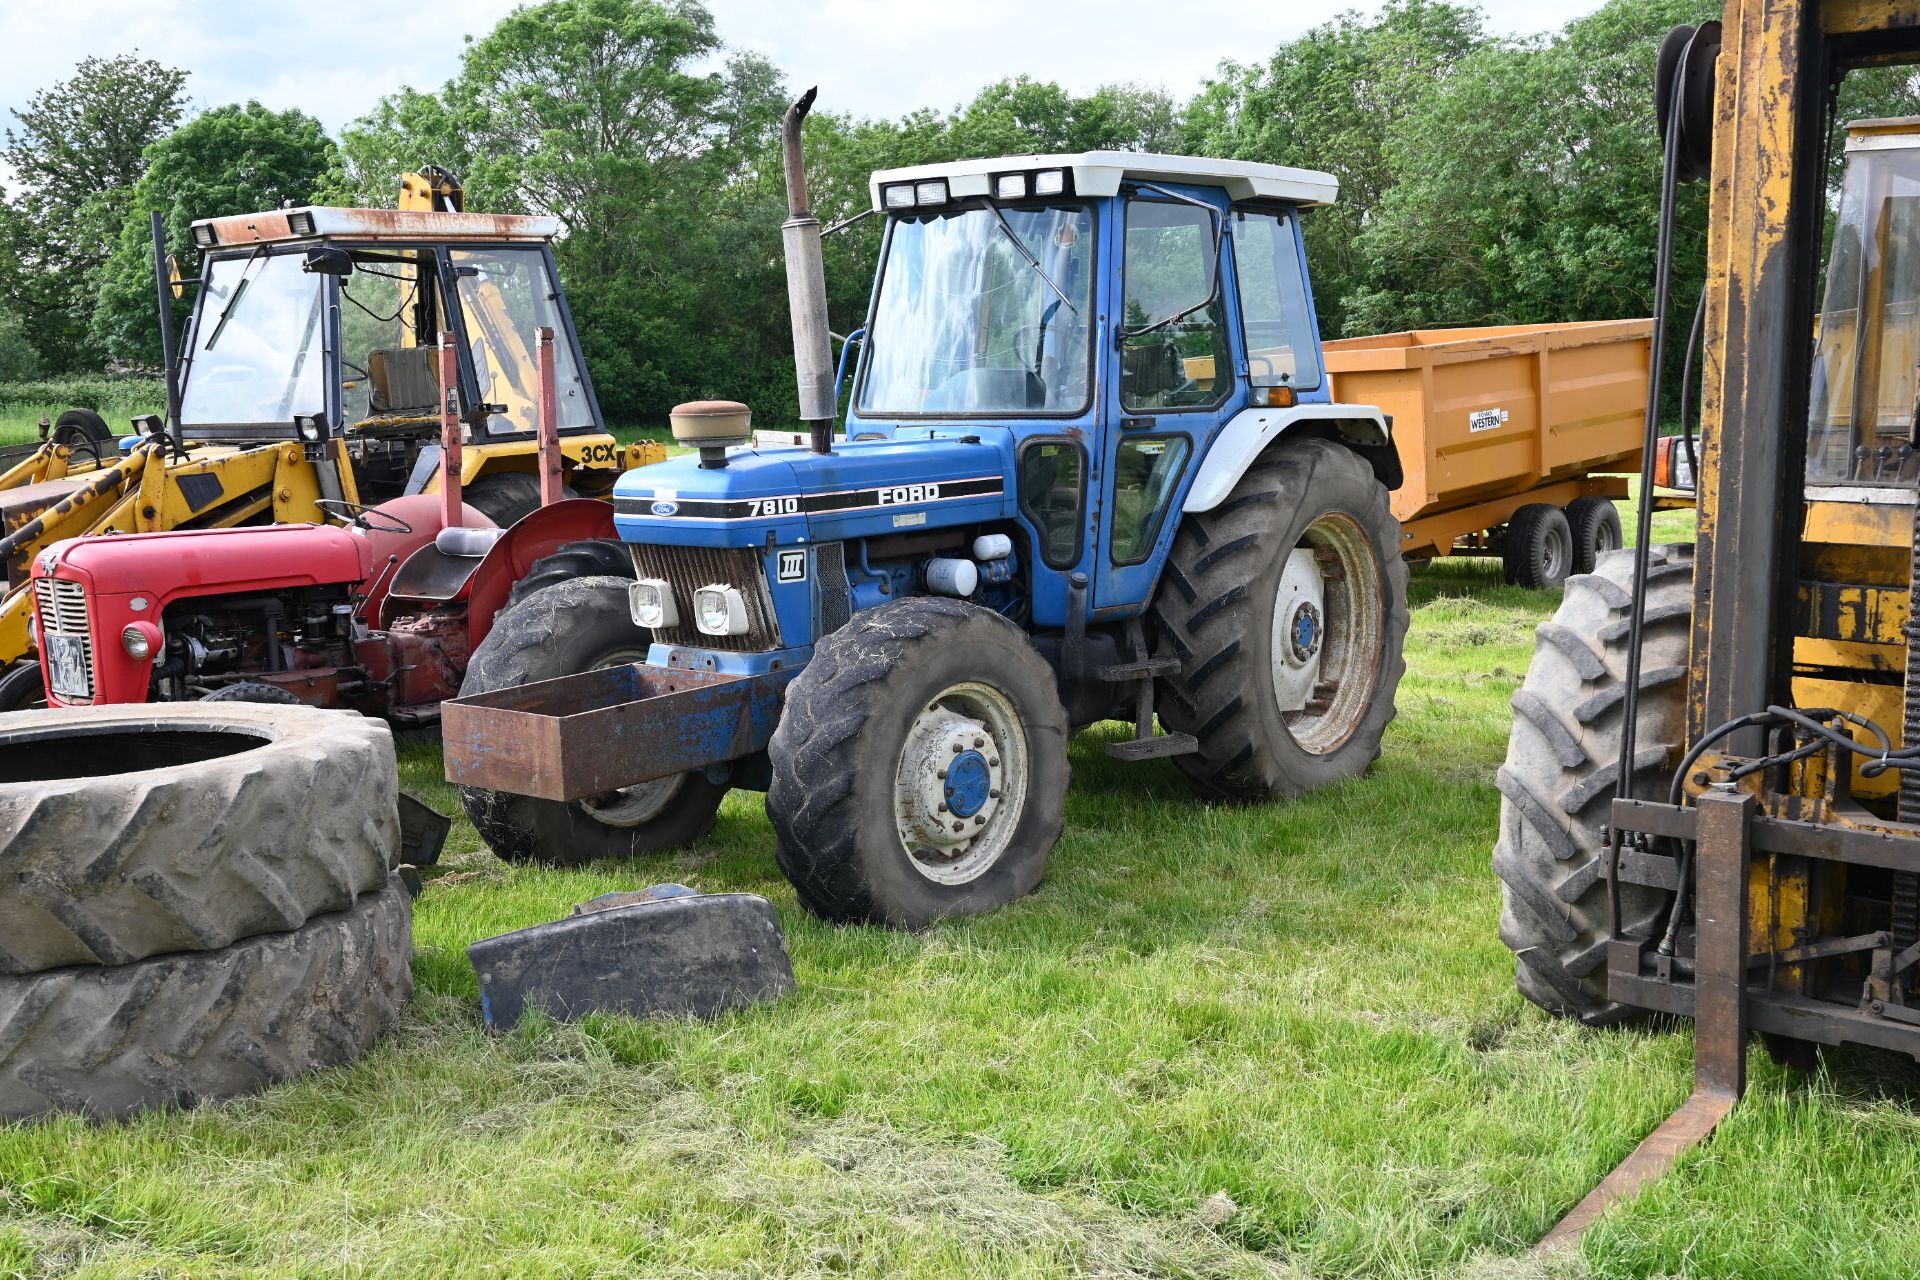 Ford 7810 tractor 4x4 120ph 7500hrs